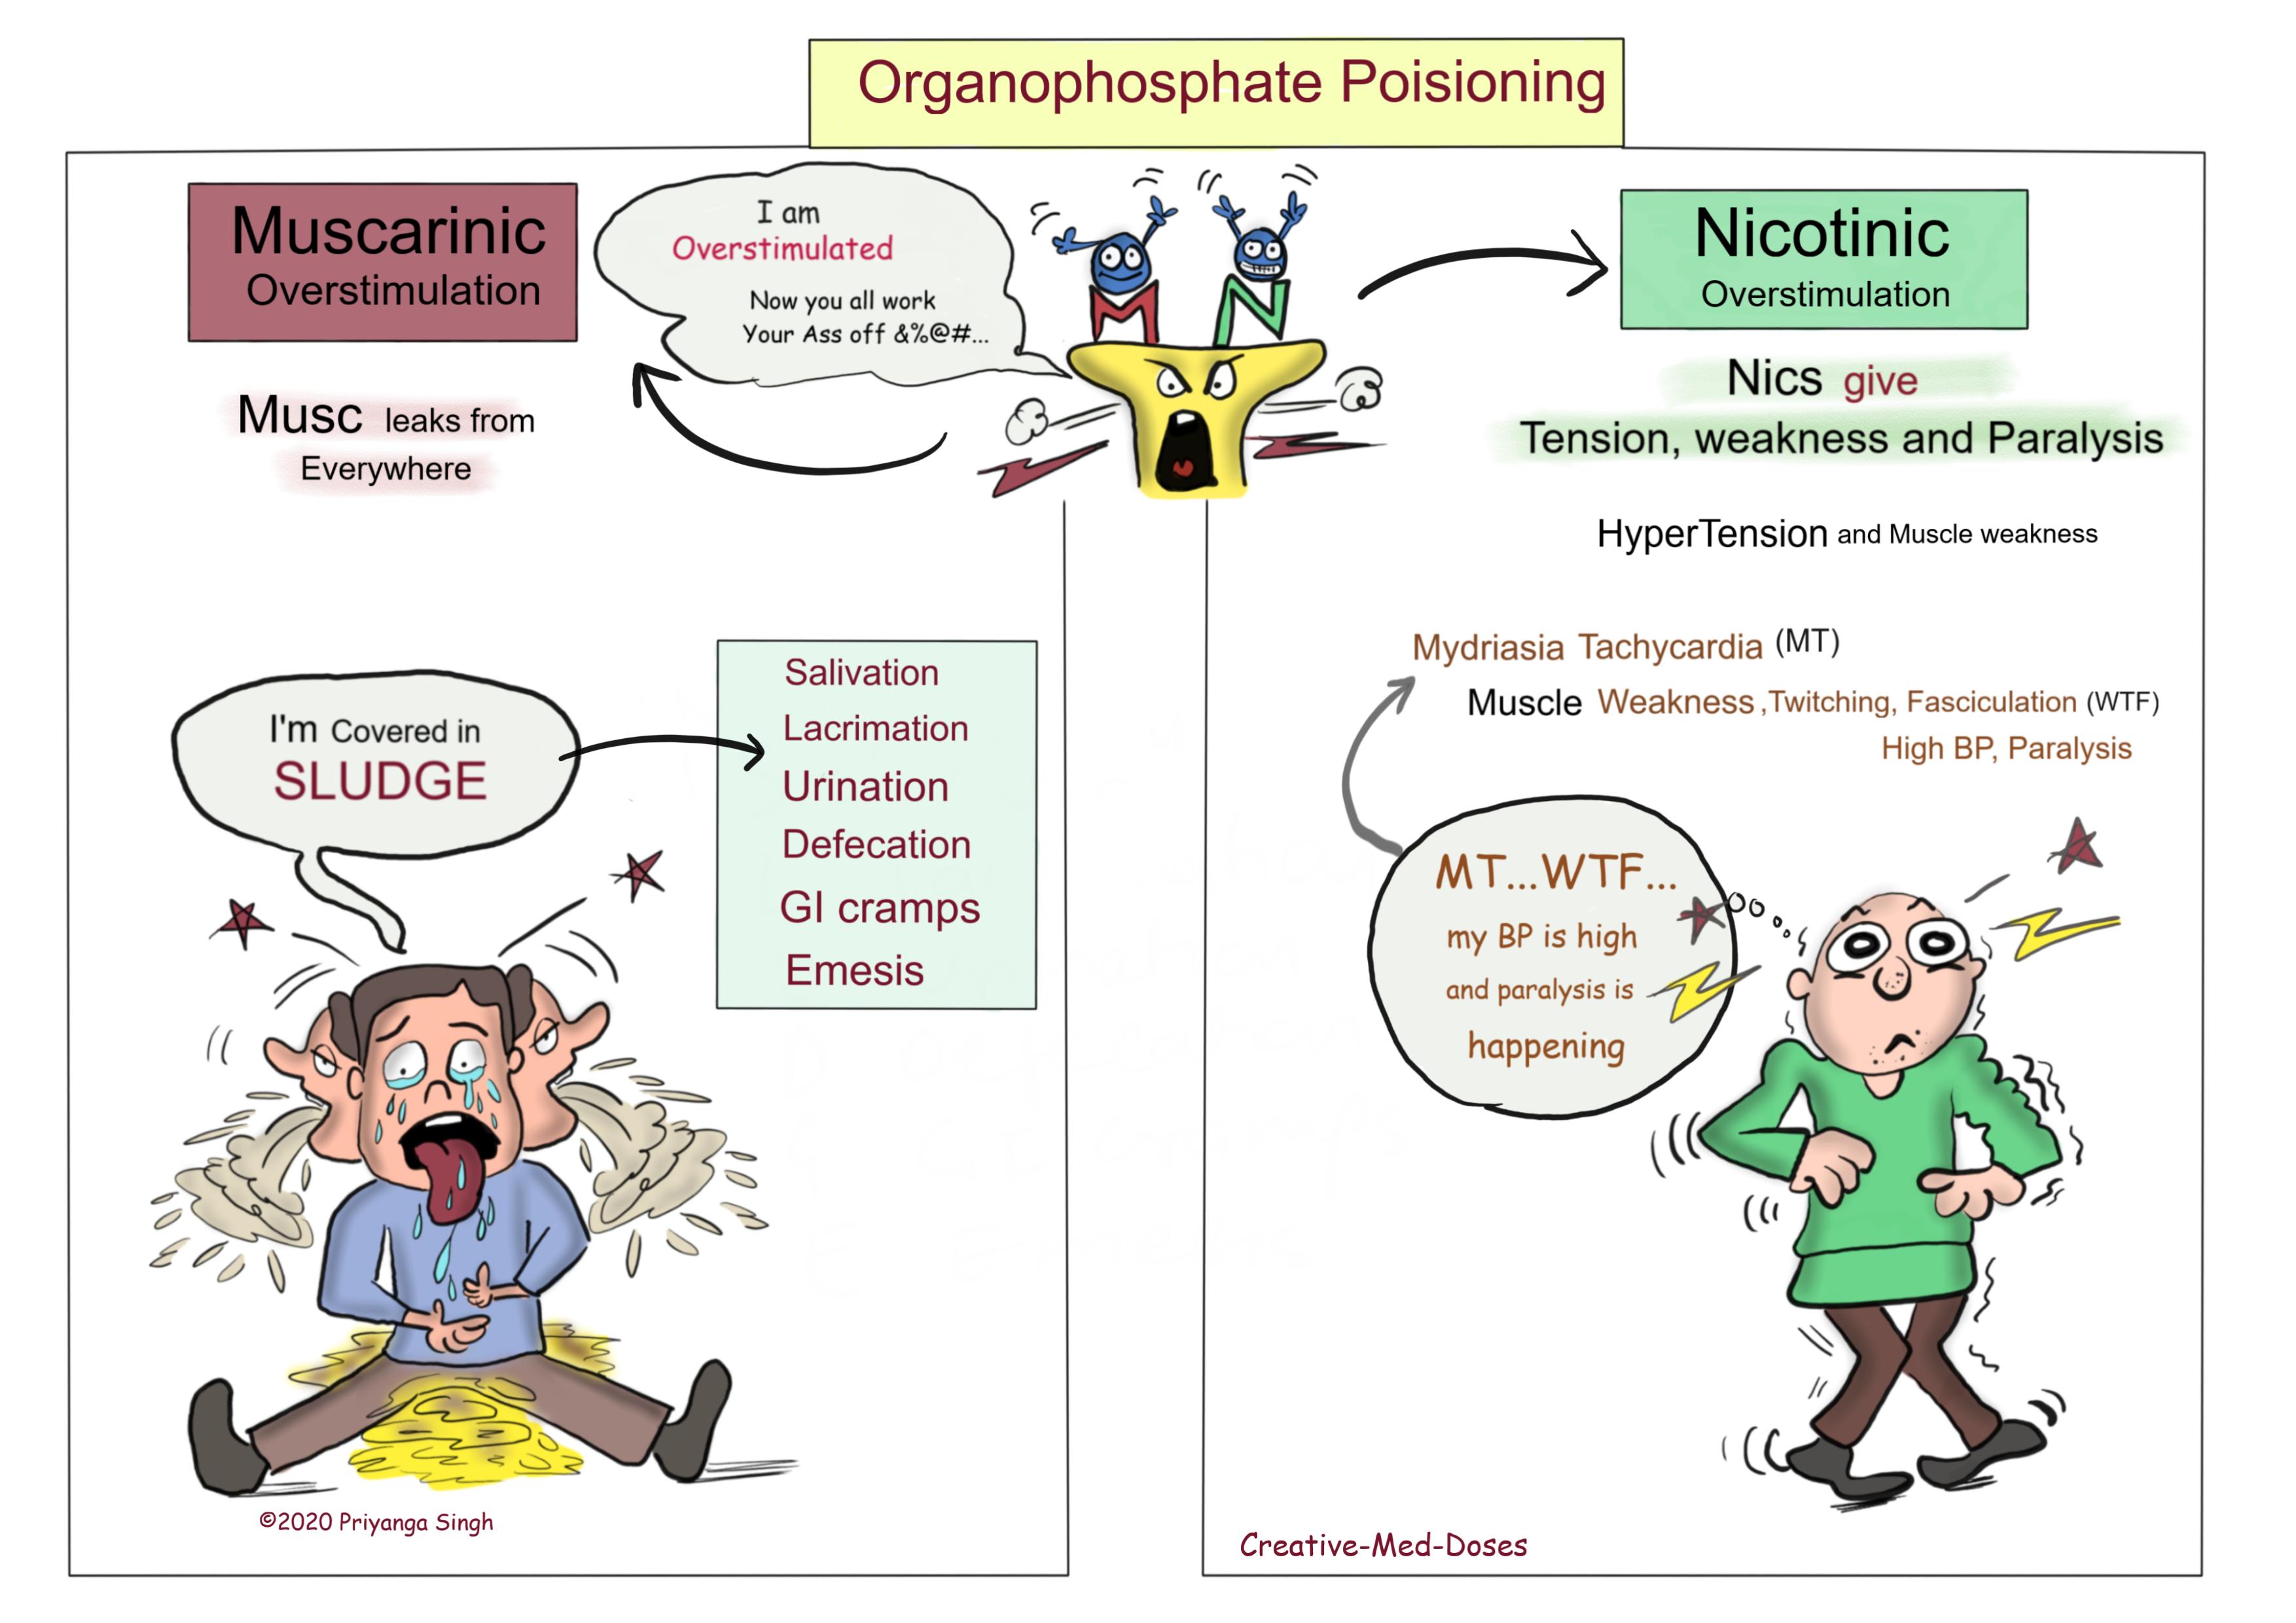 Organophosphate Poisoning: Signs and Symptoms 